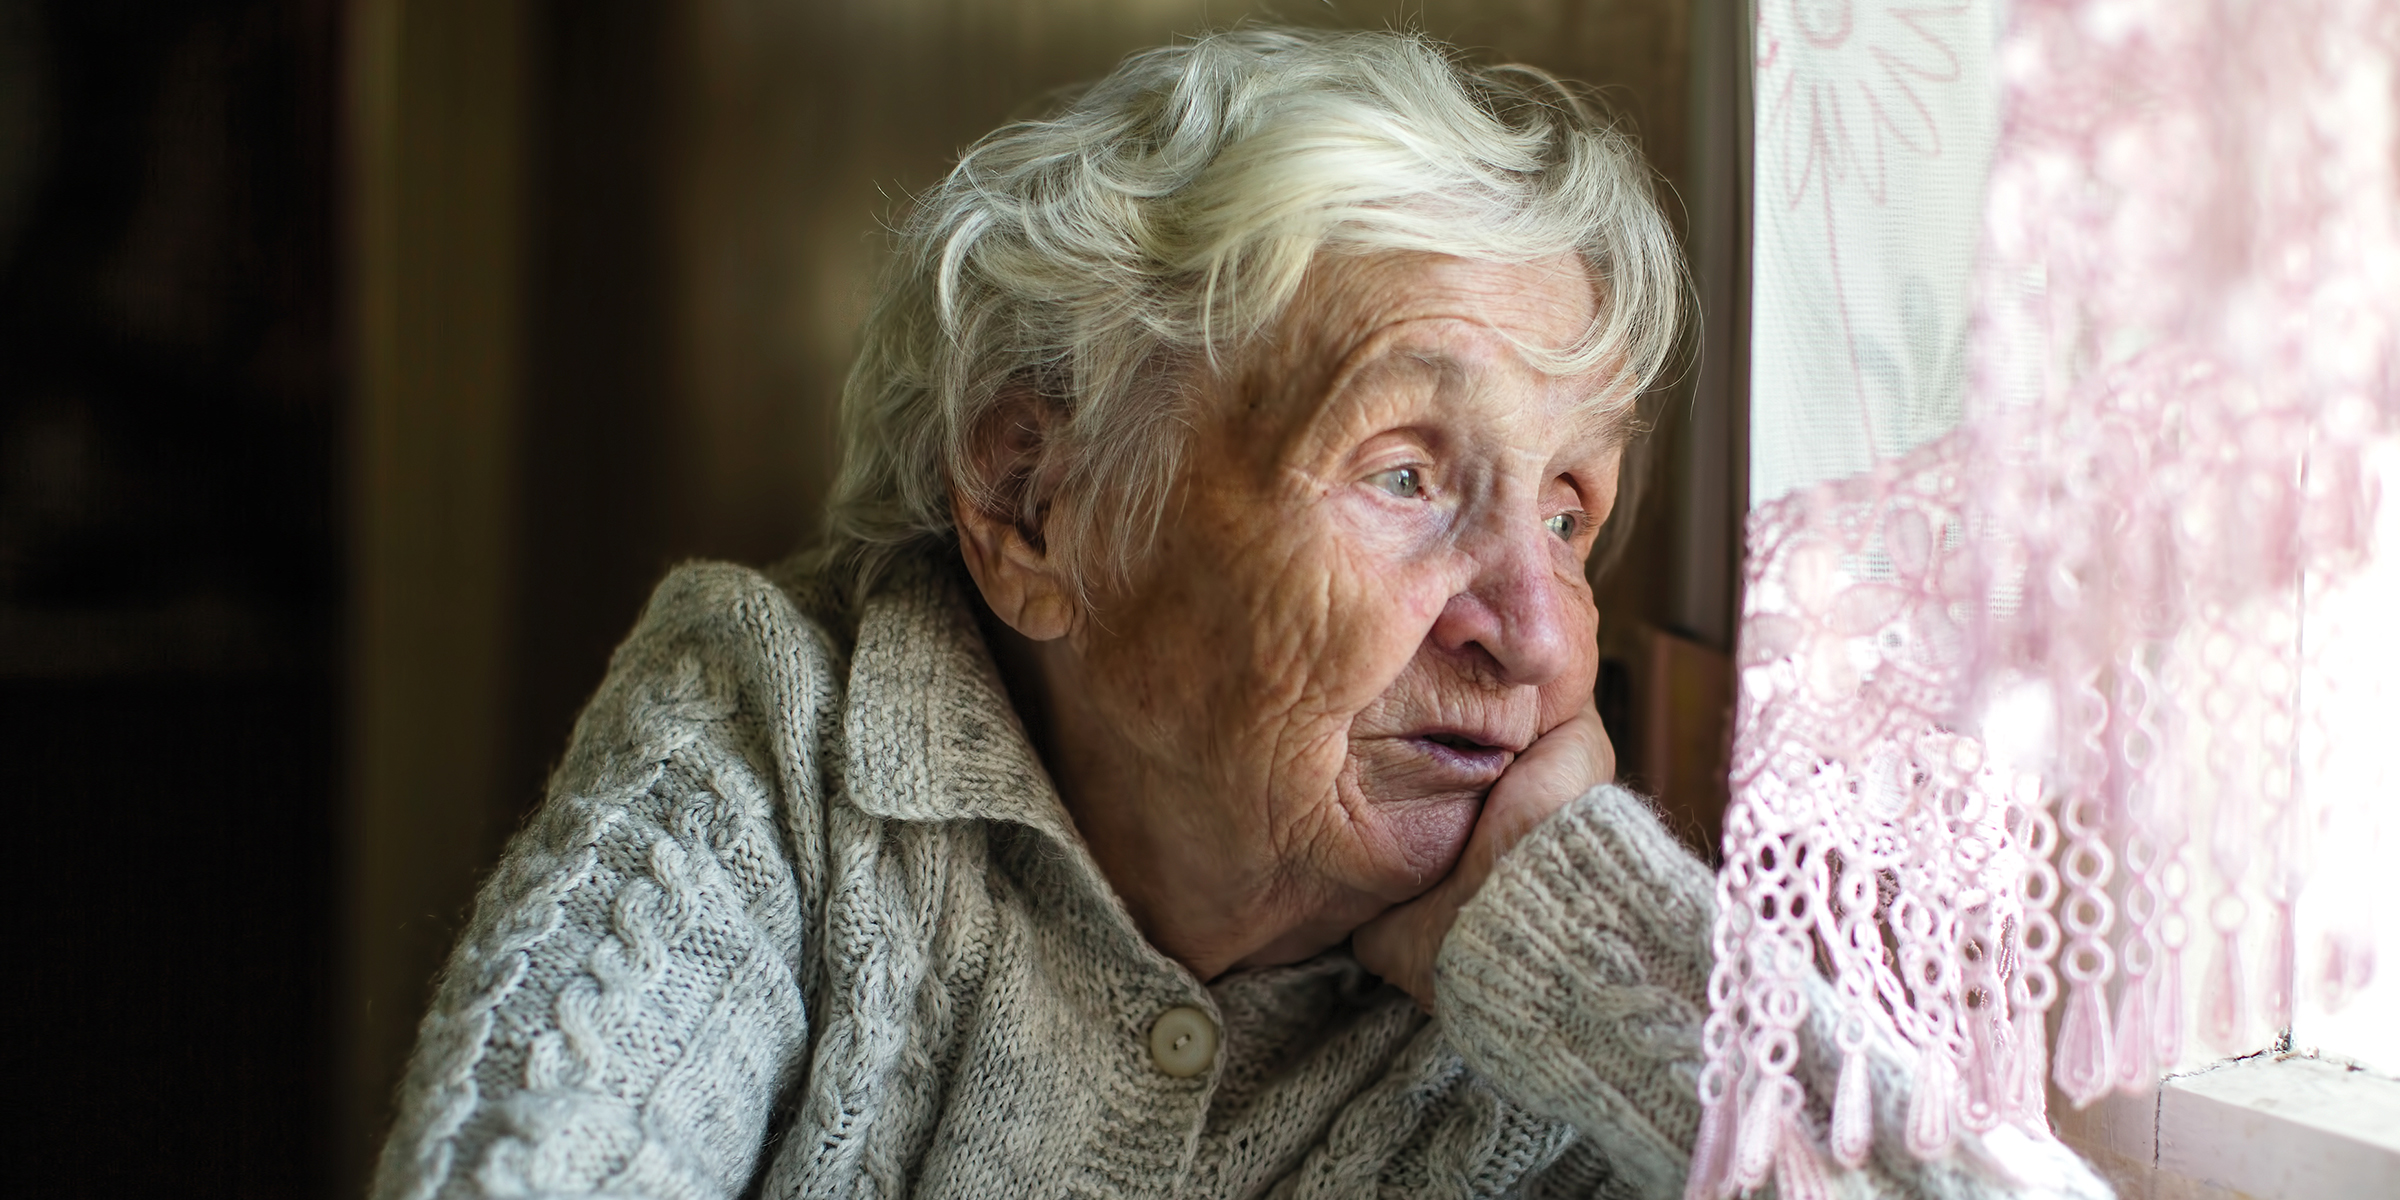 A sad elderly woman staring out a window | Source: Shutterstock